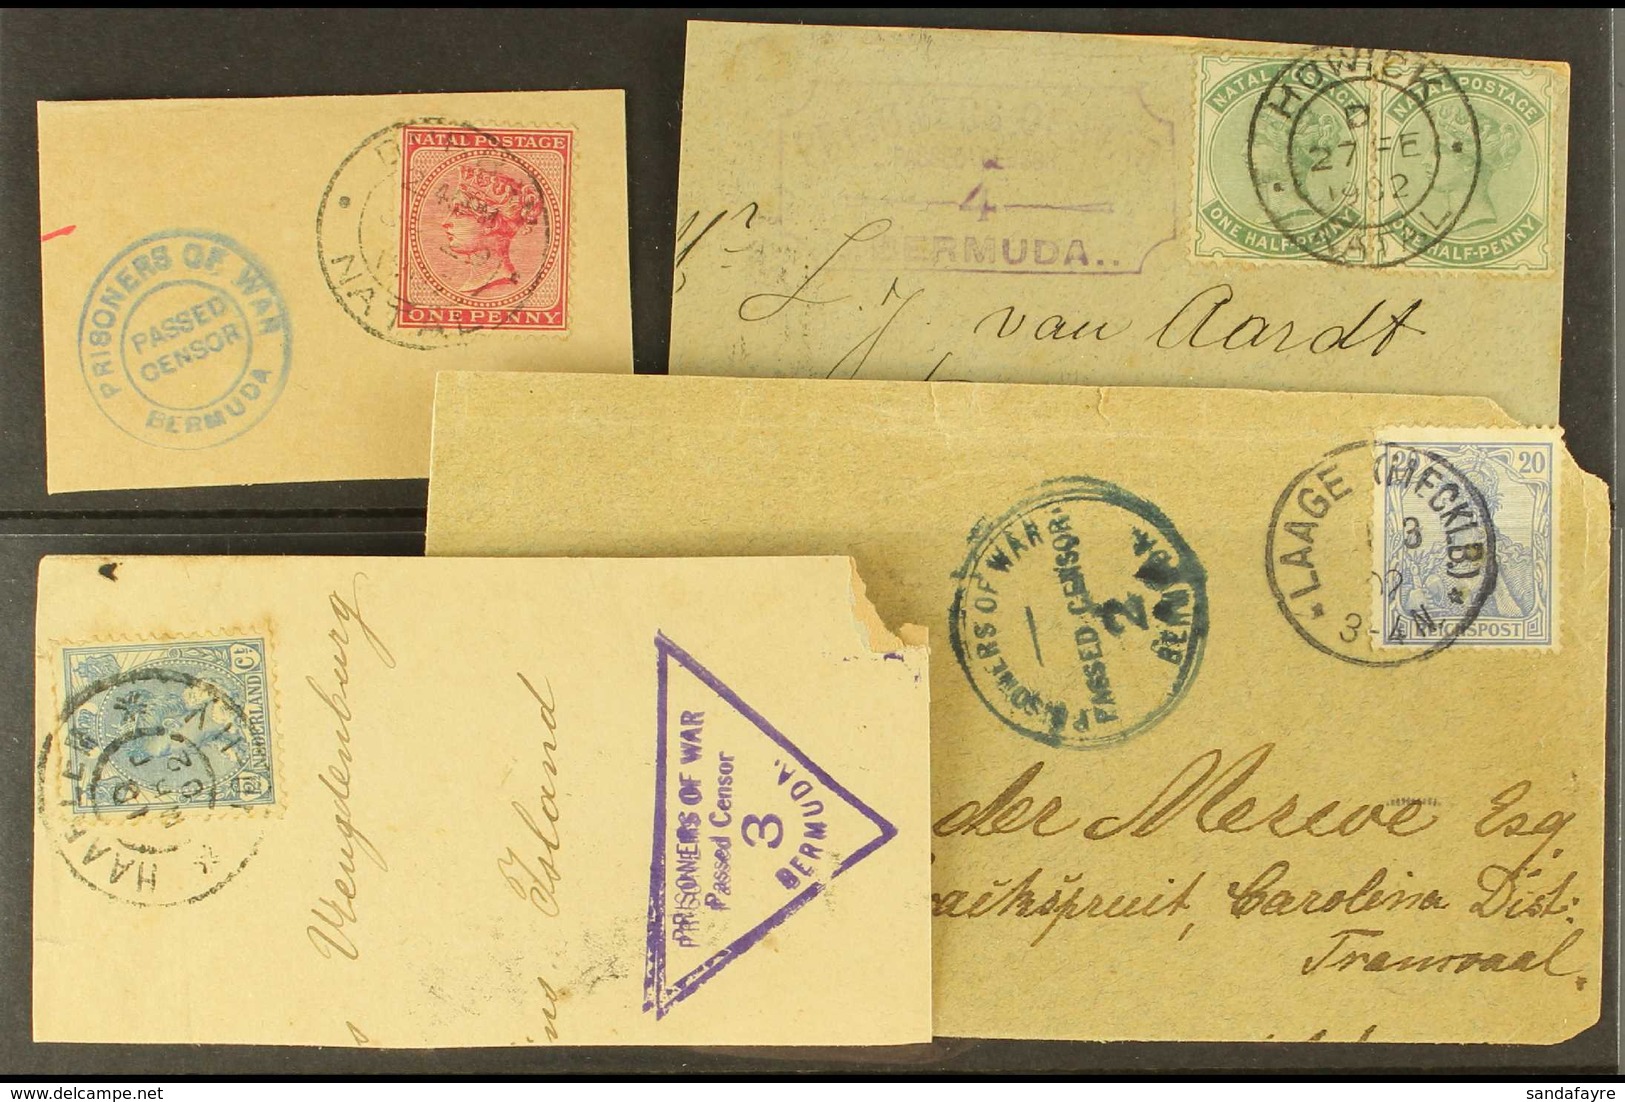 BOER WAR BERMUDA CENSOR CACHETS On Four Good Sized Pieces, All Different With Two Circular Types, One Without Number, Ot - Non Classés